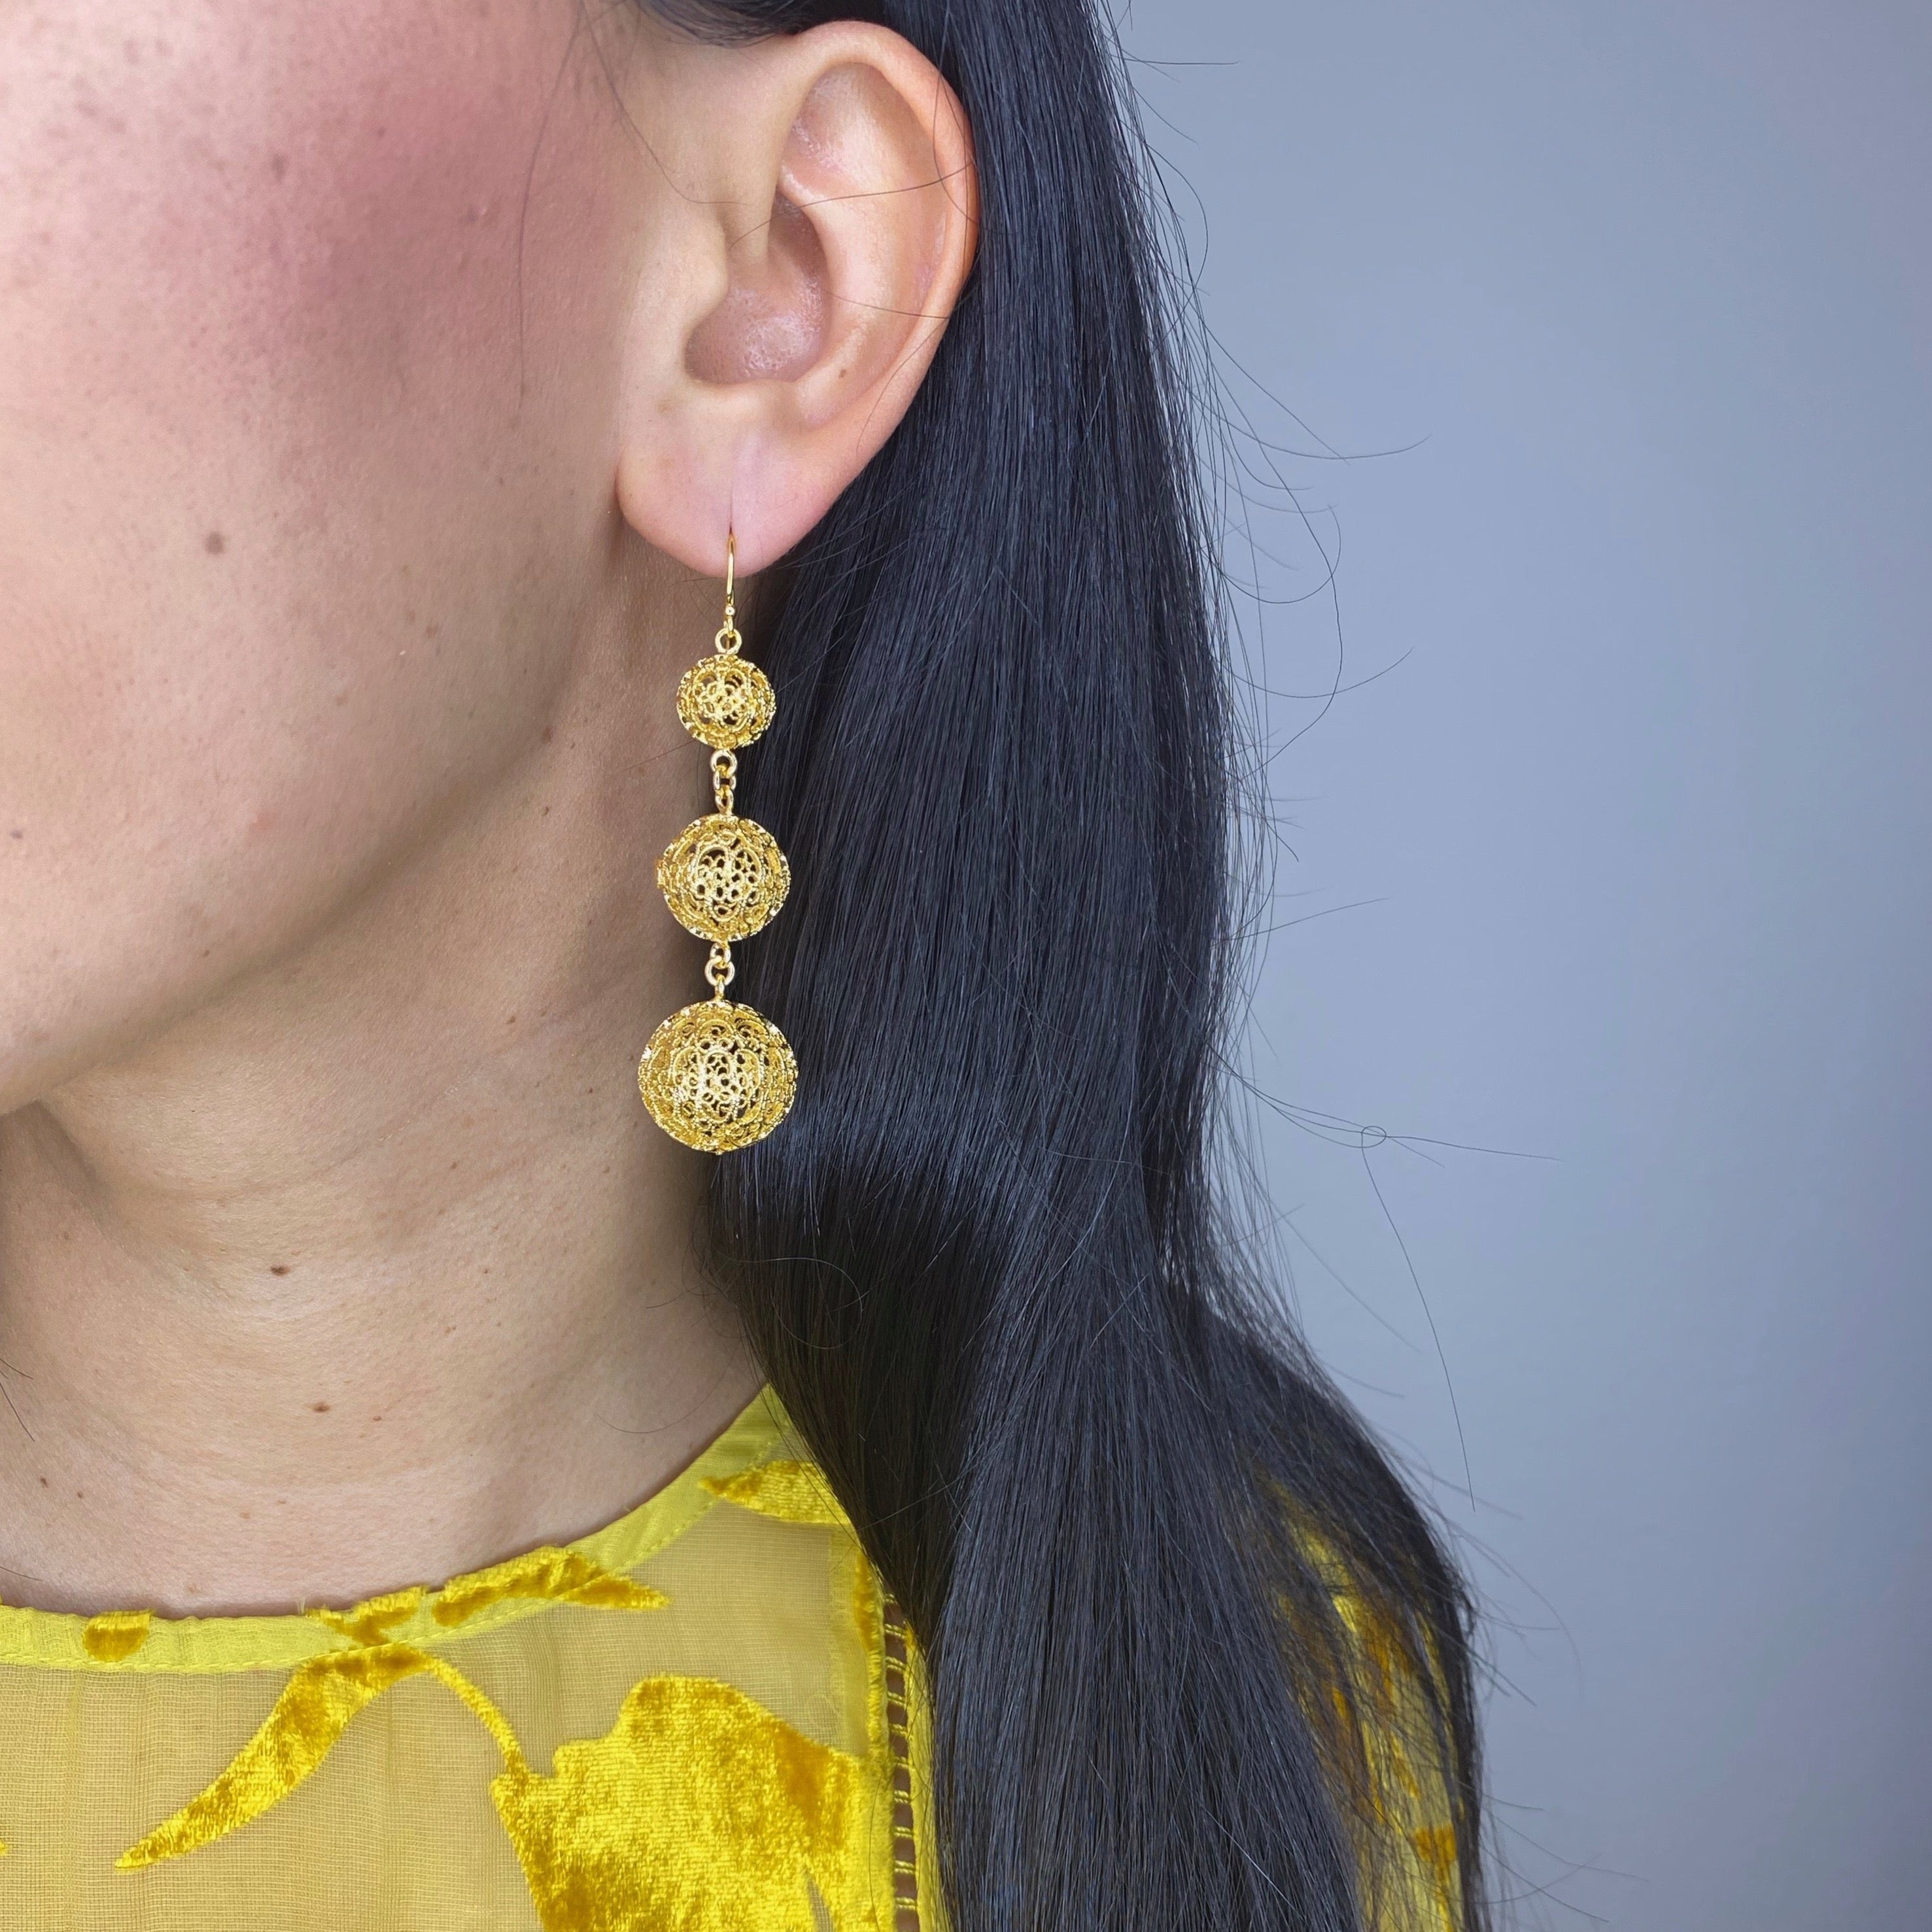 LUCRECIA GOLD LARGE STATEMENT EARRINGS FILIGREE